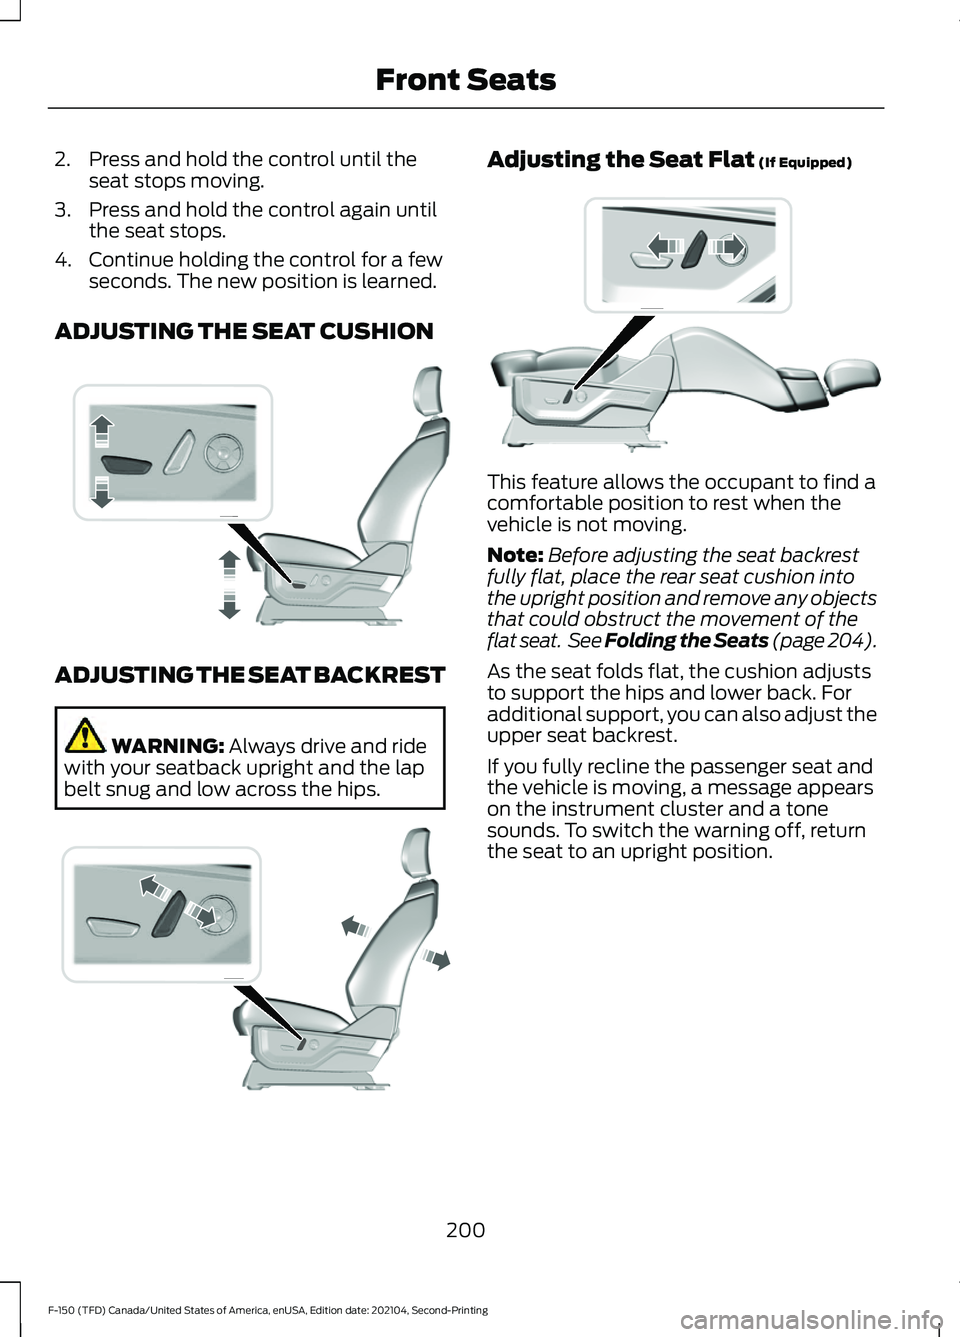 FORD F-150 2021  Owners Manual 2. Press and hold the control until the
seat stops moving.
3. Press and hold the control again until the seat stops.
4. Continue holding the control for a few seconds. The new position is learned.
ADJ